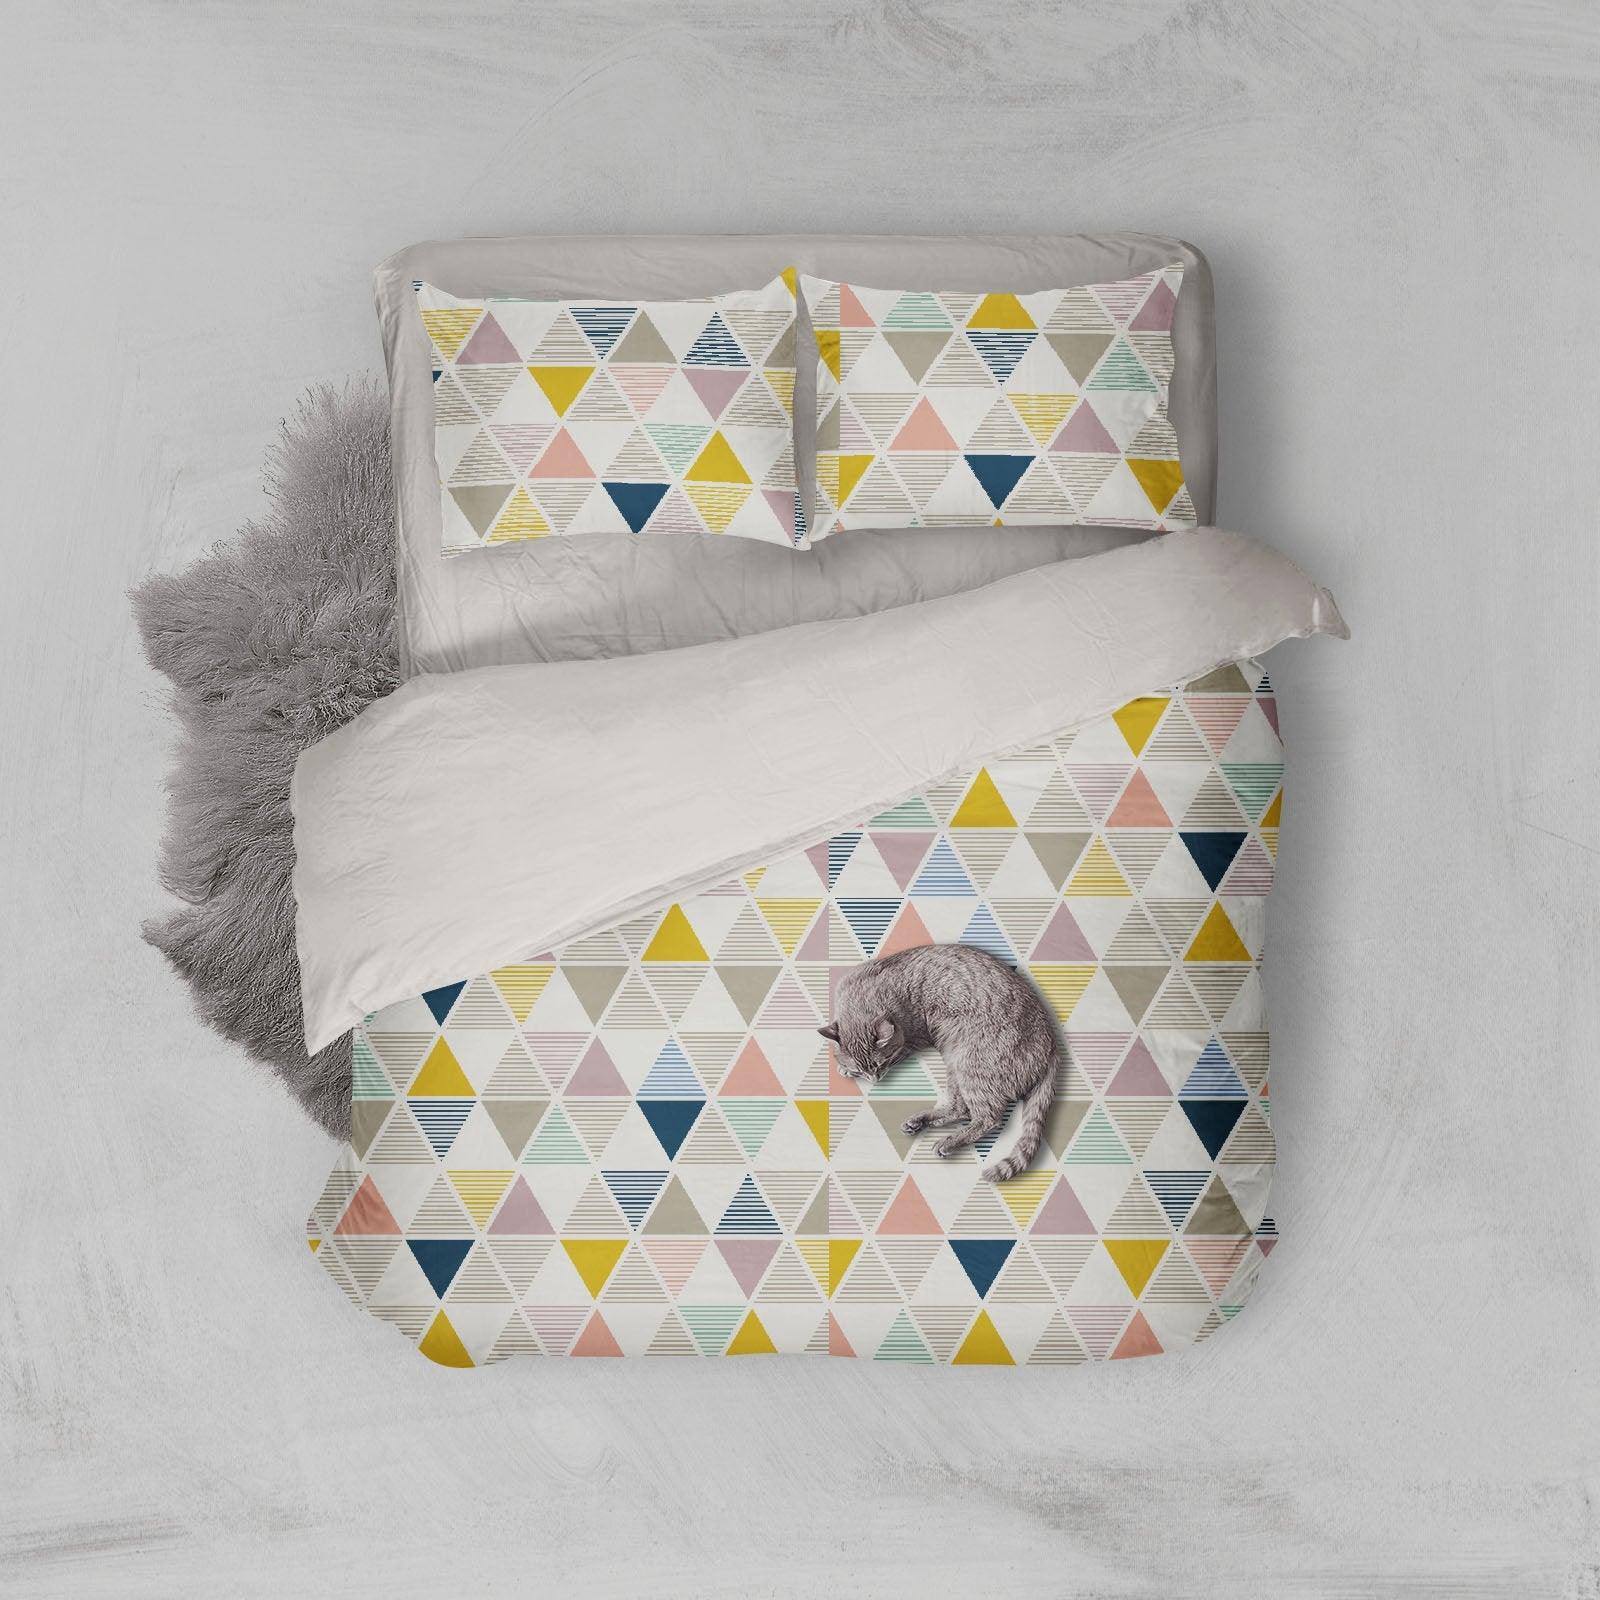 3D The geometry Bedding Set Quilt Cover Quilt Duvet Cover ,Pillowcases Personalized  Bedding,Queen, King ,Full, Double 3 Pcs- Jess Art Decoration